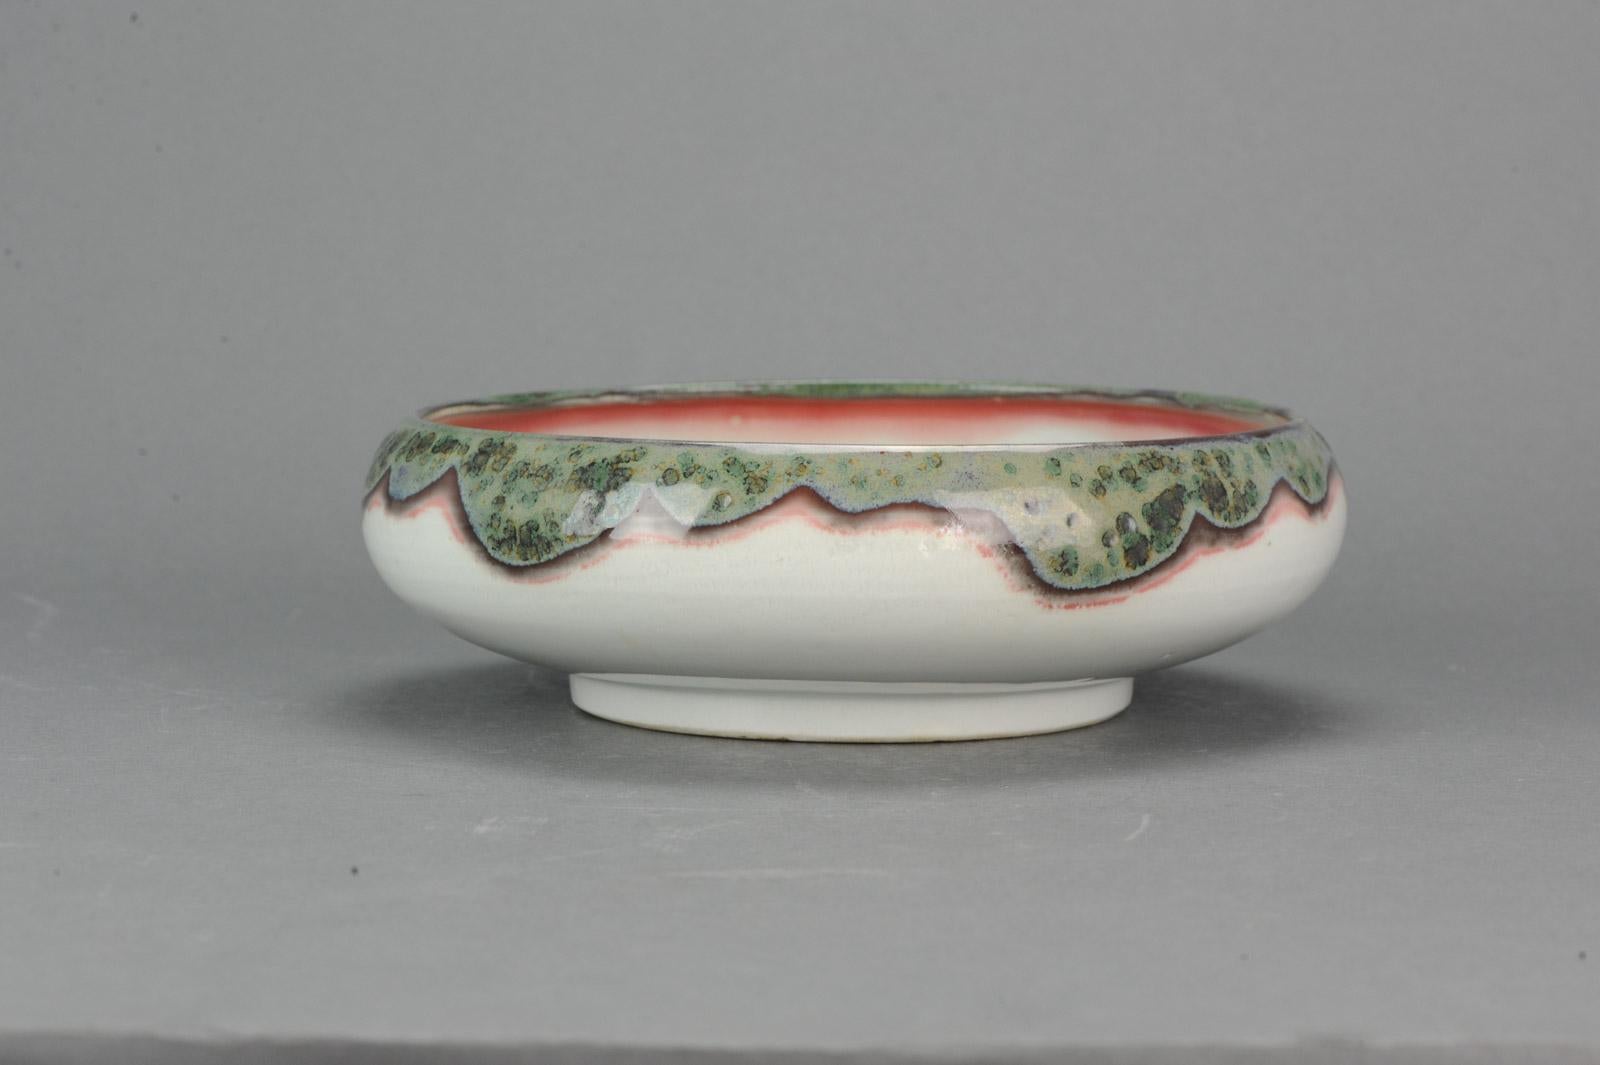 Here we have a very nice and delicate Large Japanese porcelain Bowl or Serving Dish with very nice and uncommon colors. In perfect condition.

Additional information:
Material: Porcelain & Pottery
Region of Origin: Japan
Period: ca 1900 Showa